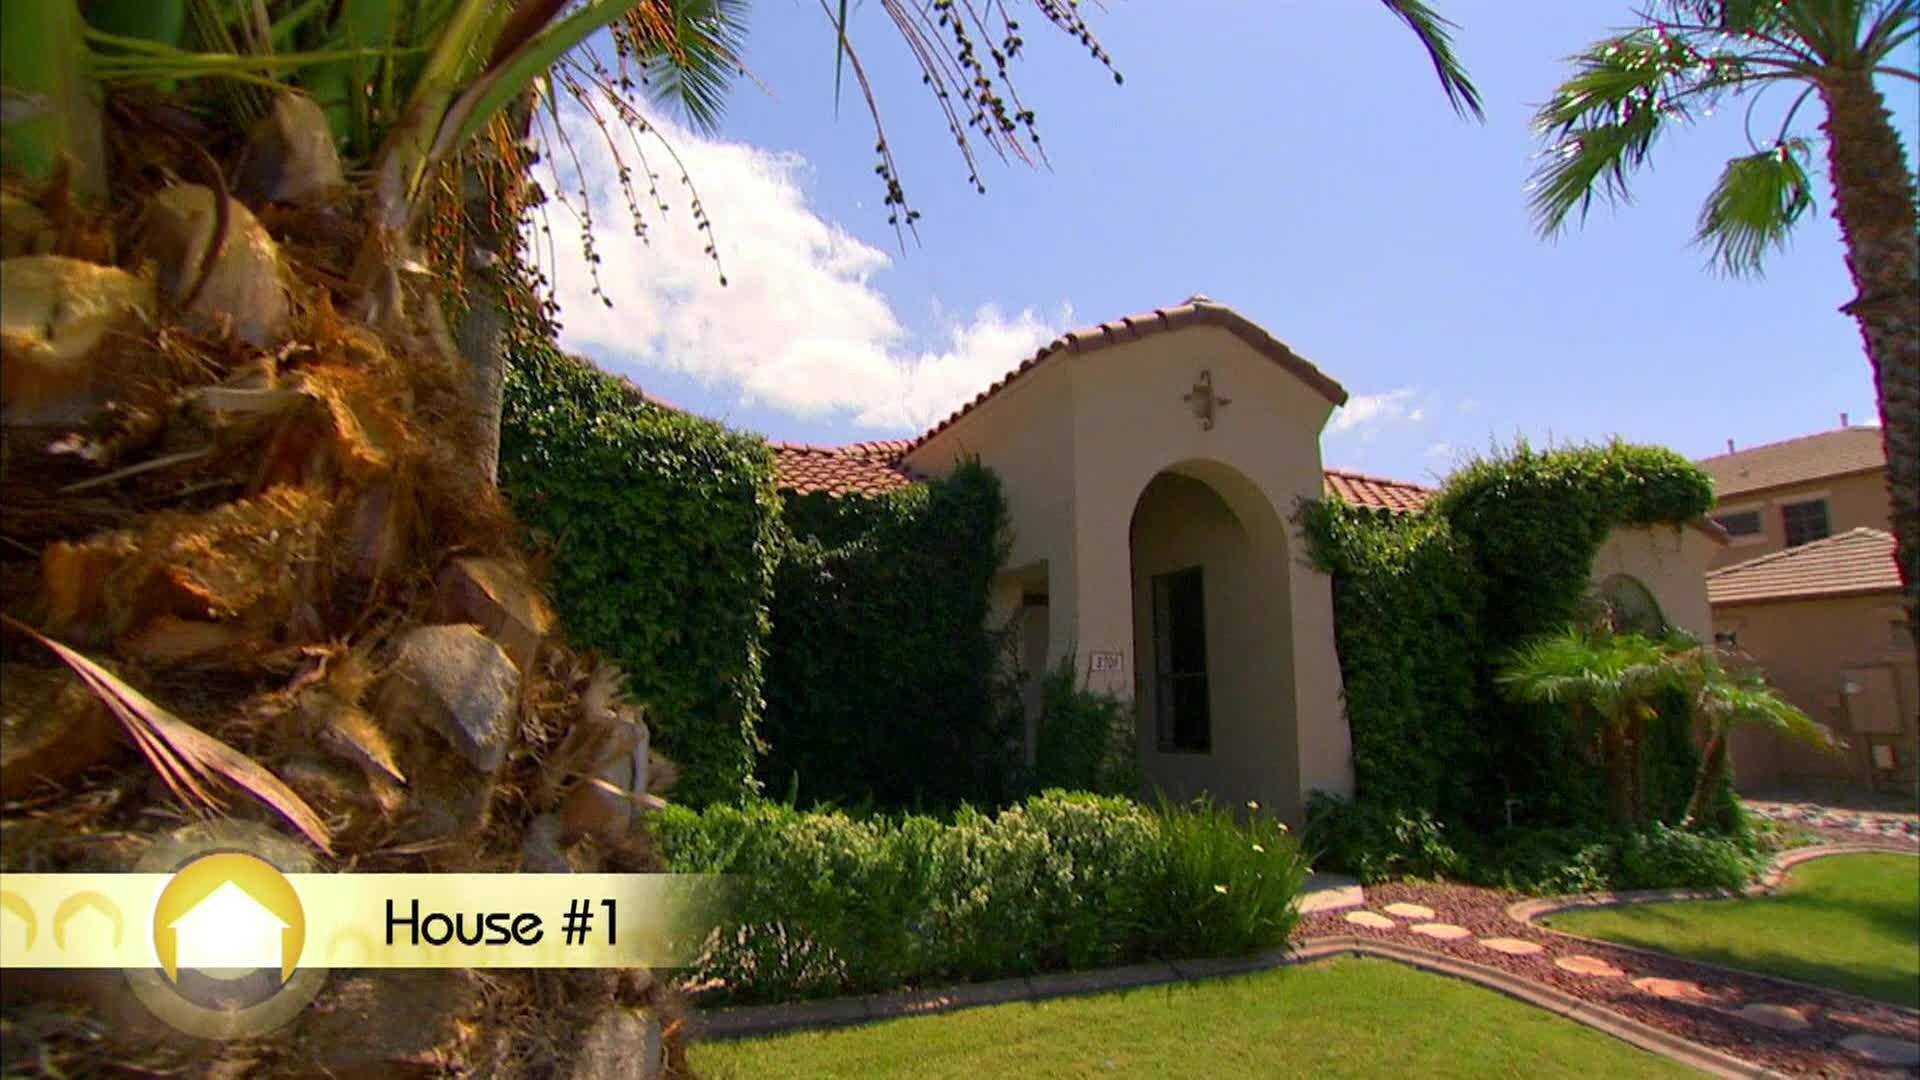 Meet the woman whose voice you hear on every episode of 'House Hunters'